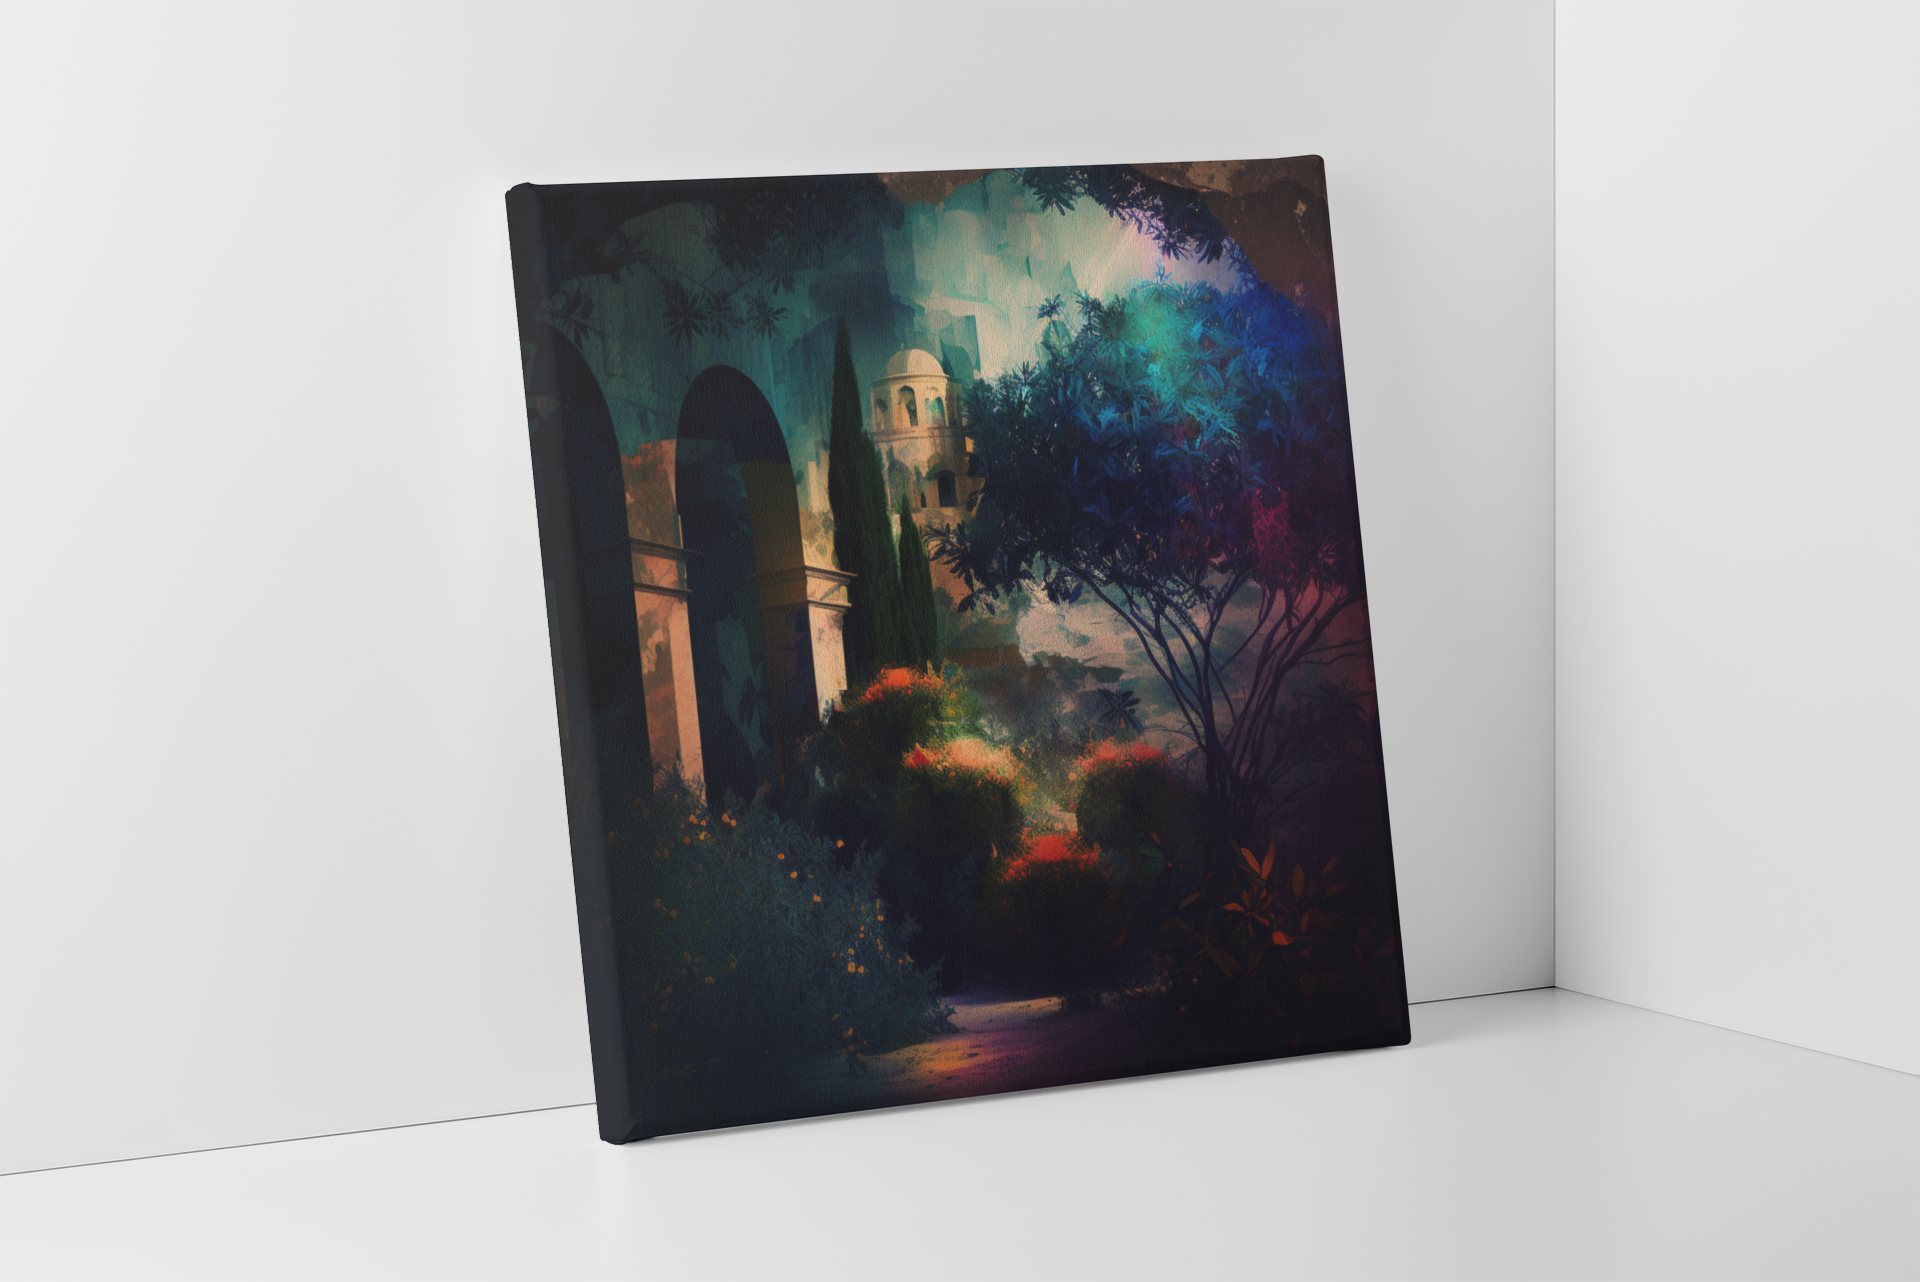 12x12 inch canvas print of the Garden of Gethsemane, a holy site in Jerusalem where Jesus is said to have prayed before his crucifixion. High-quality and durable, a perfect way to show your faith and bring inspiration to your home or office decor